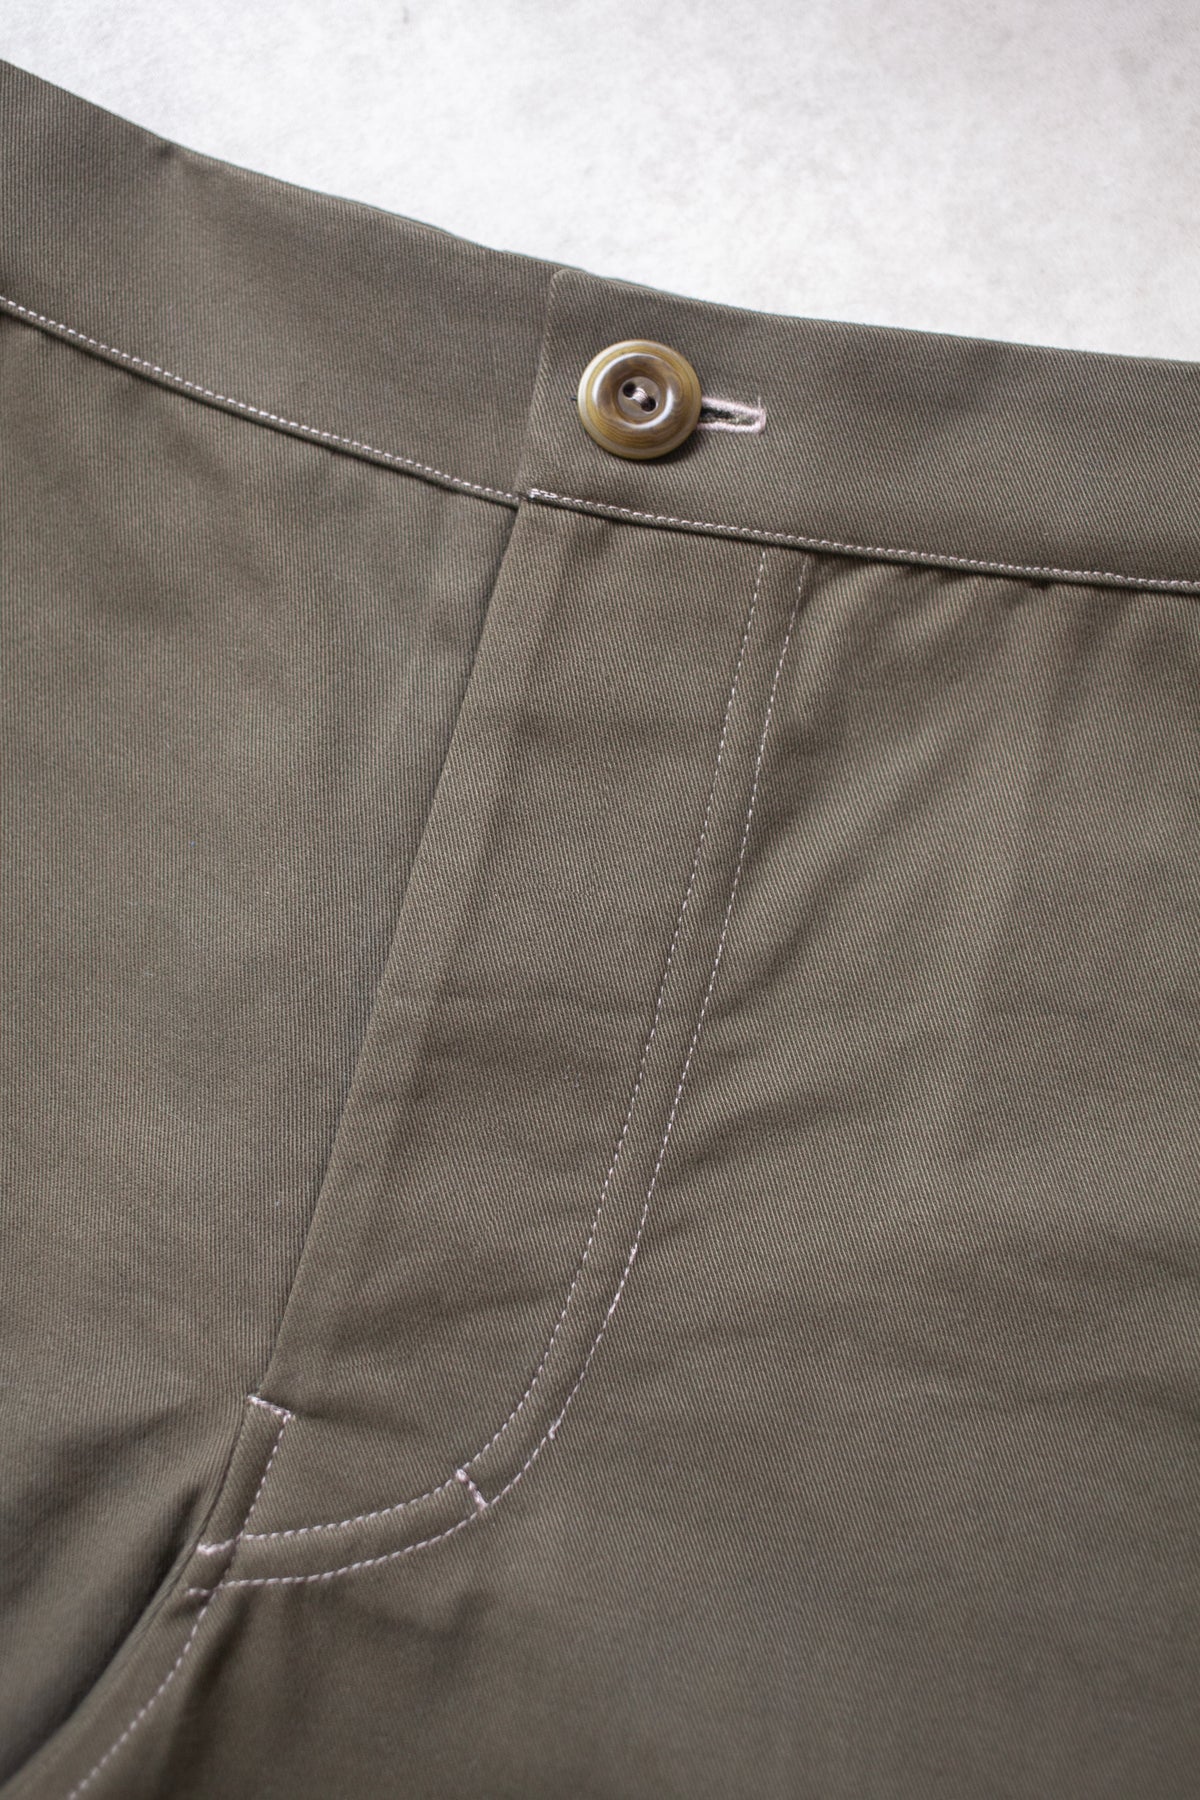 The Modern Sewing Co. Men's Worker Trousers - The Fold Line